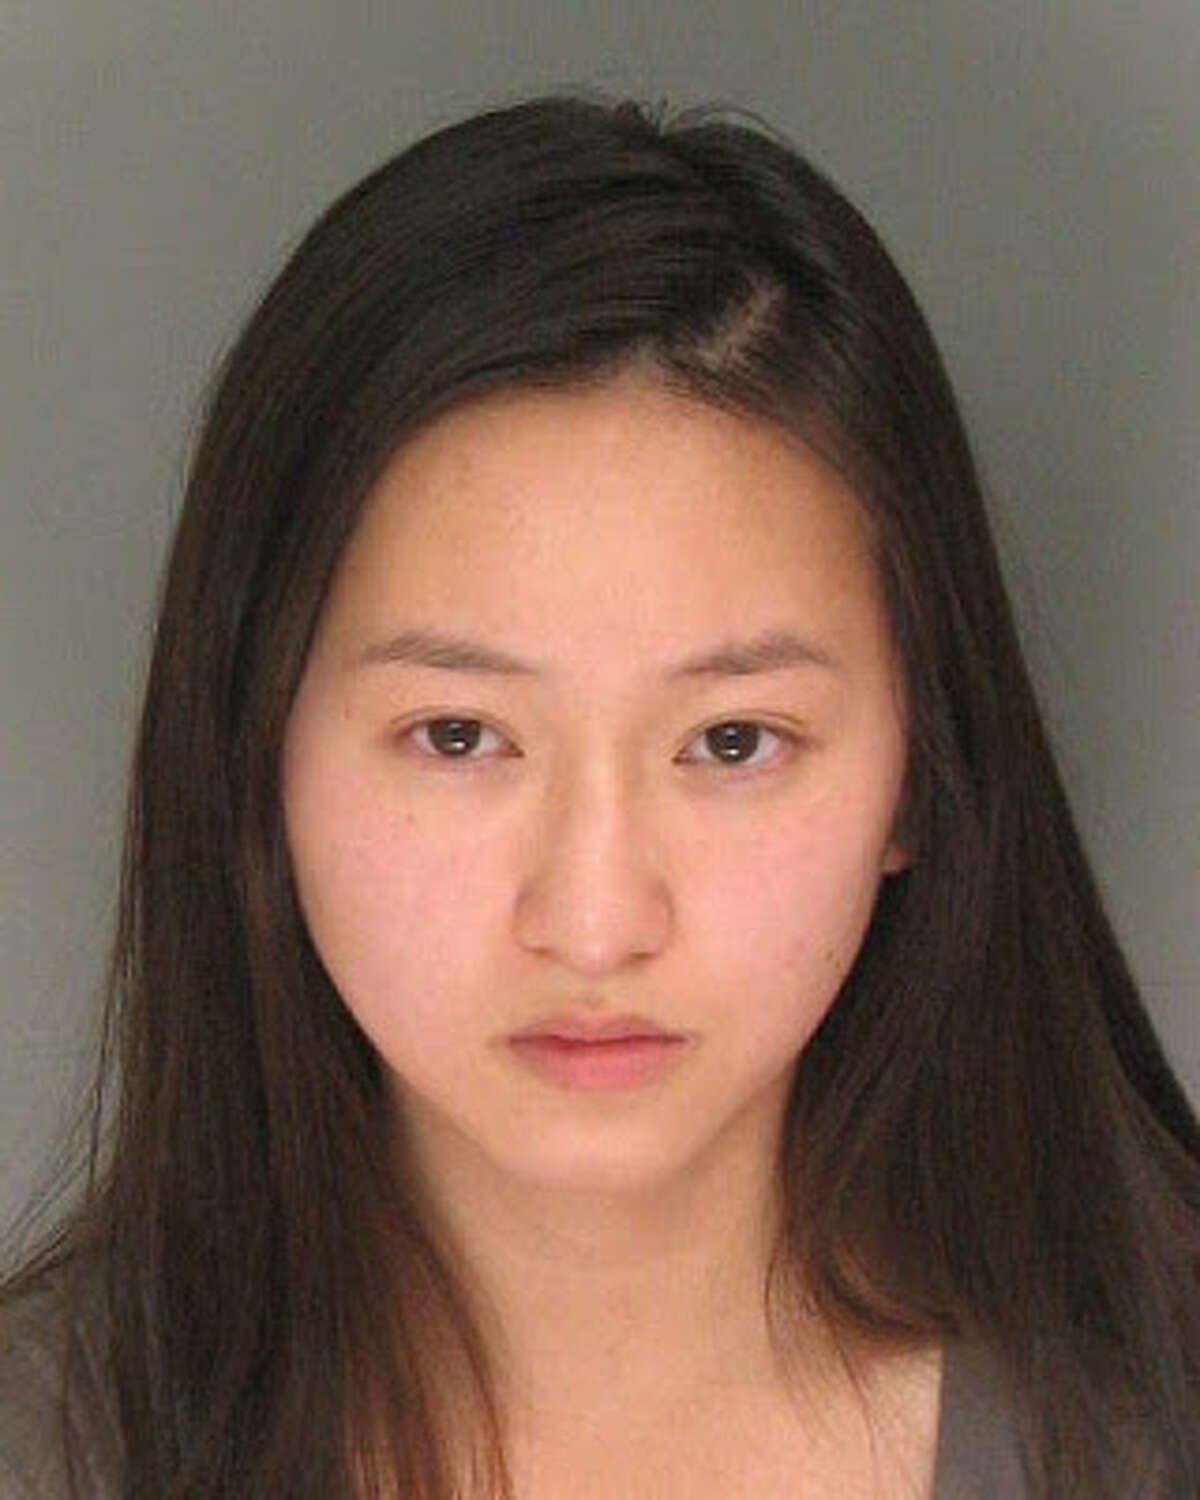 Cecilia Le, age 21, was one of six UC Santa Cruz students arrested in the bust.